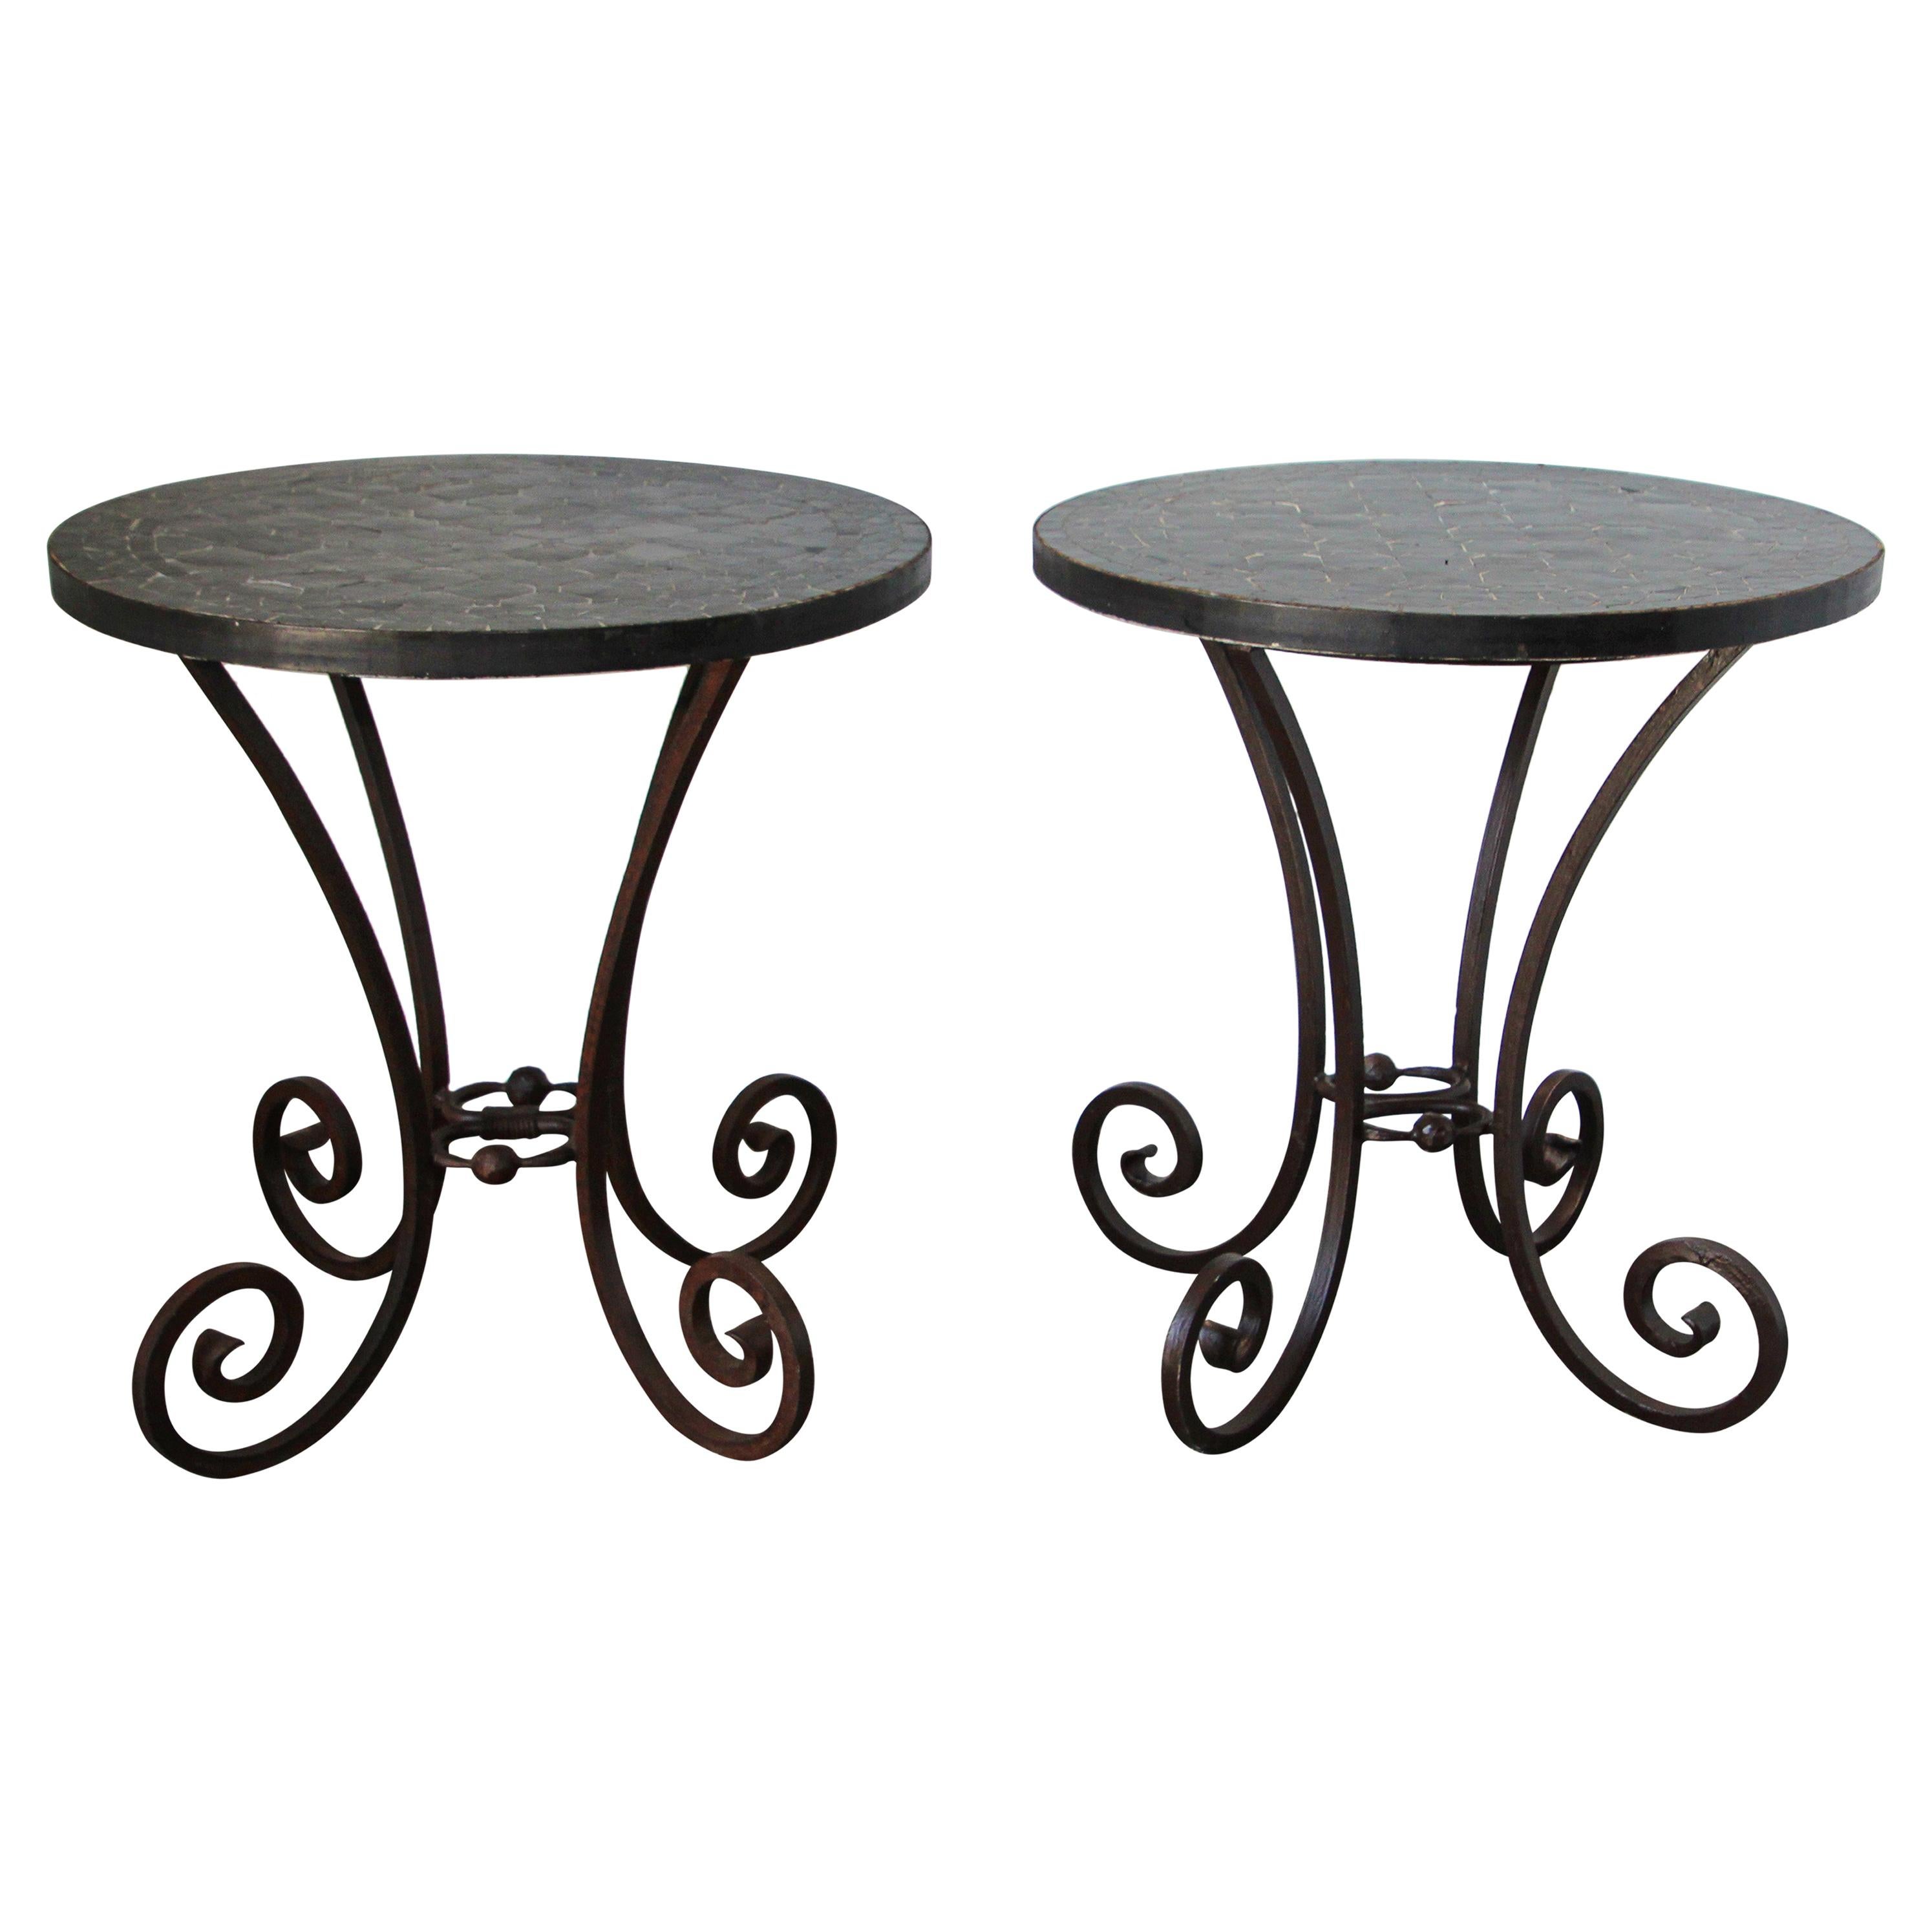 Moroccan Mosaic Antique Black Tile Color Side Table Set of Two